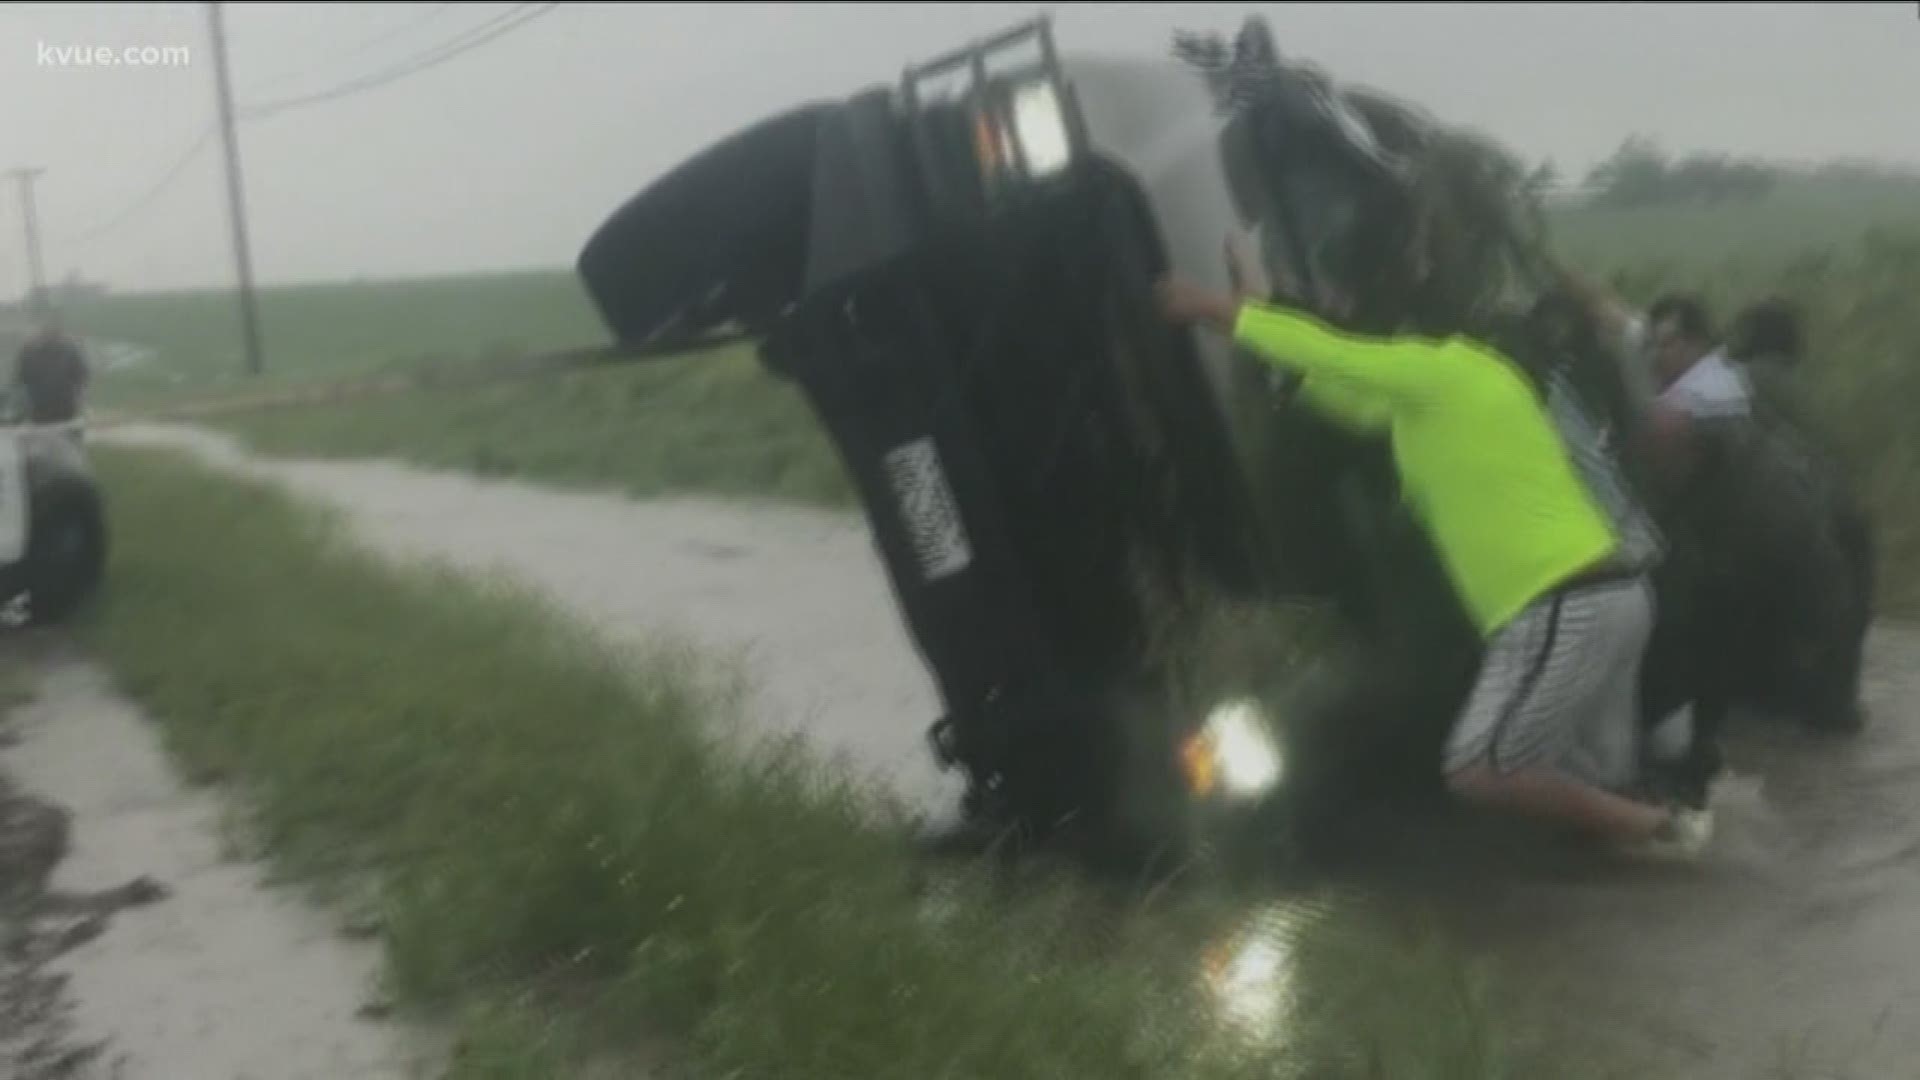 Strangers helped rescue a man from a flipped truck in a flooded ditch in Williamson County.